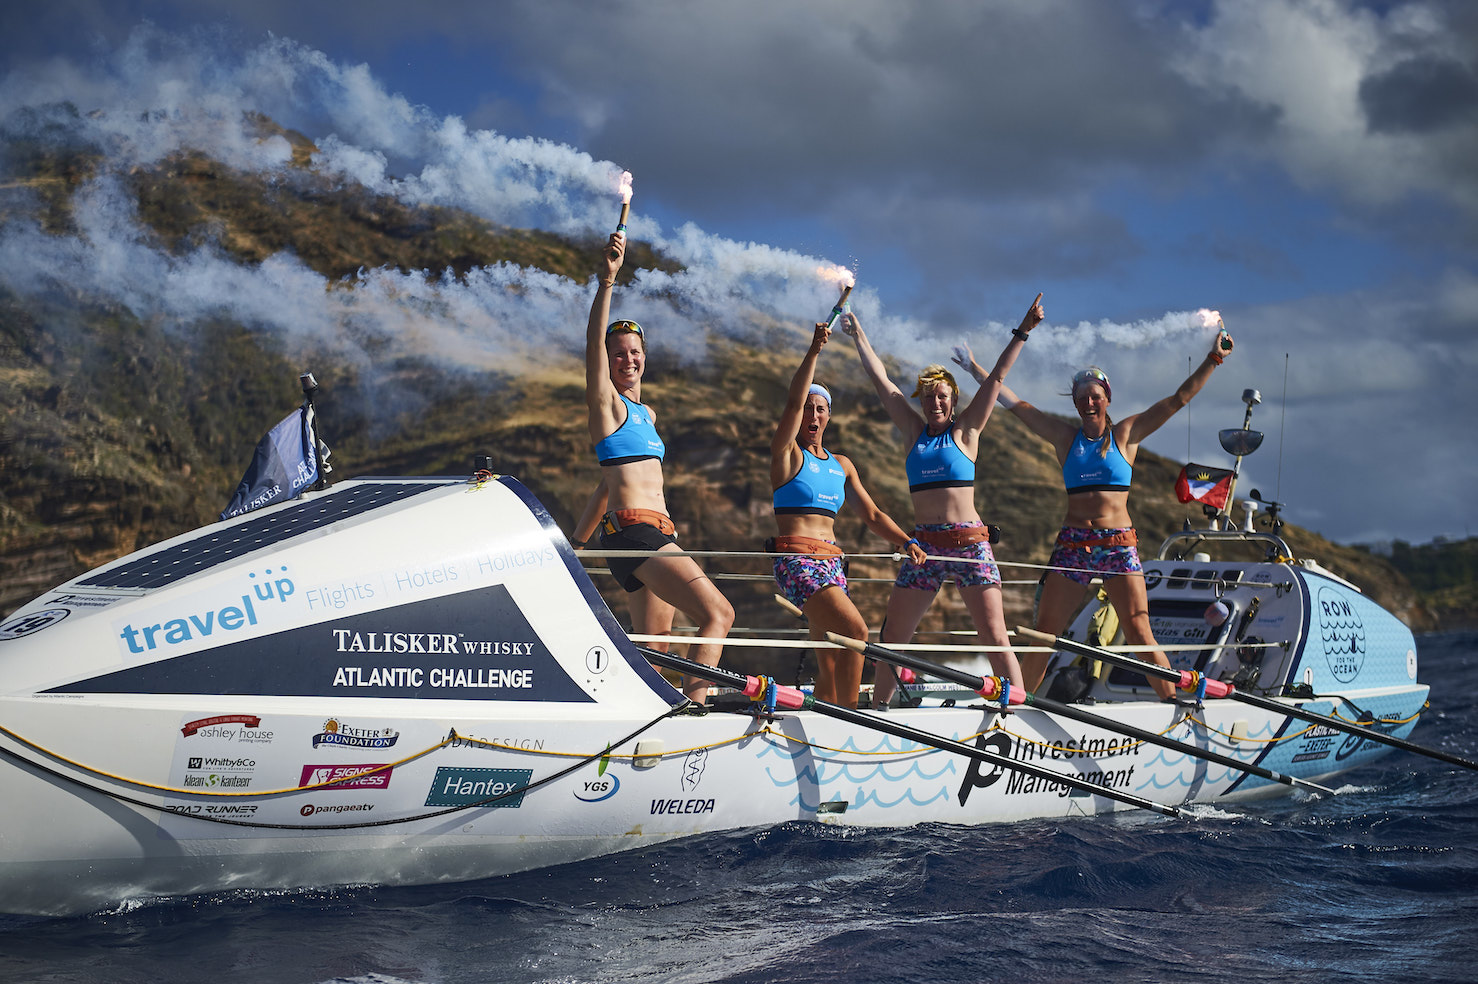 GB Team Row For The Ocean Finish The Talisker Whisky Atlantic Challenge (L R Kirsty Barker%2C Kate Salmon%2C Laura Try%2C And Rosalind Holsgrove West) CREDIT BEN DUFFY (1)  RESIZED 